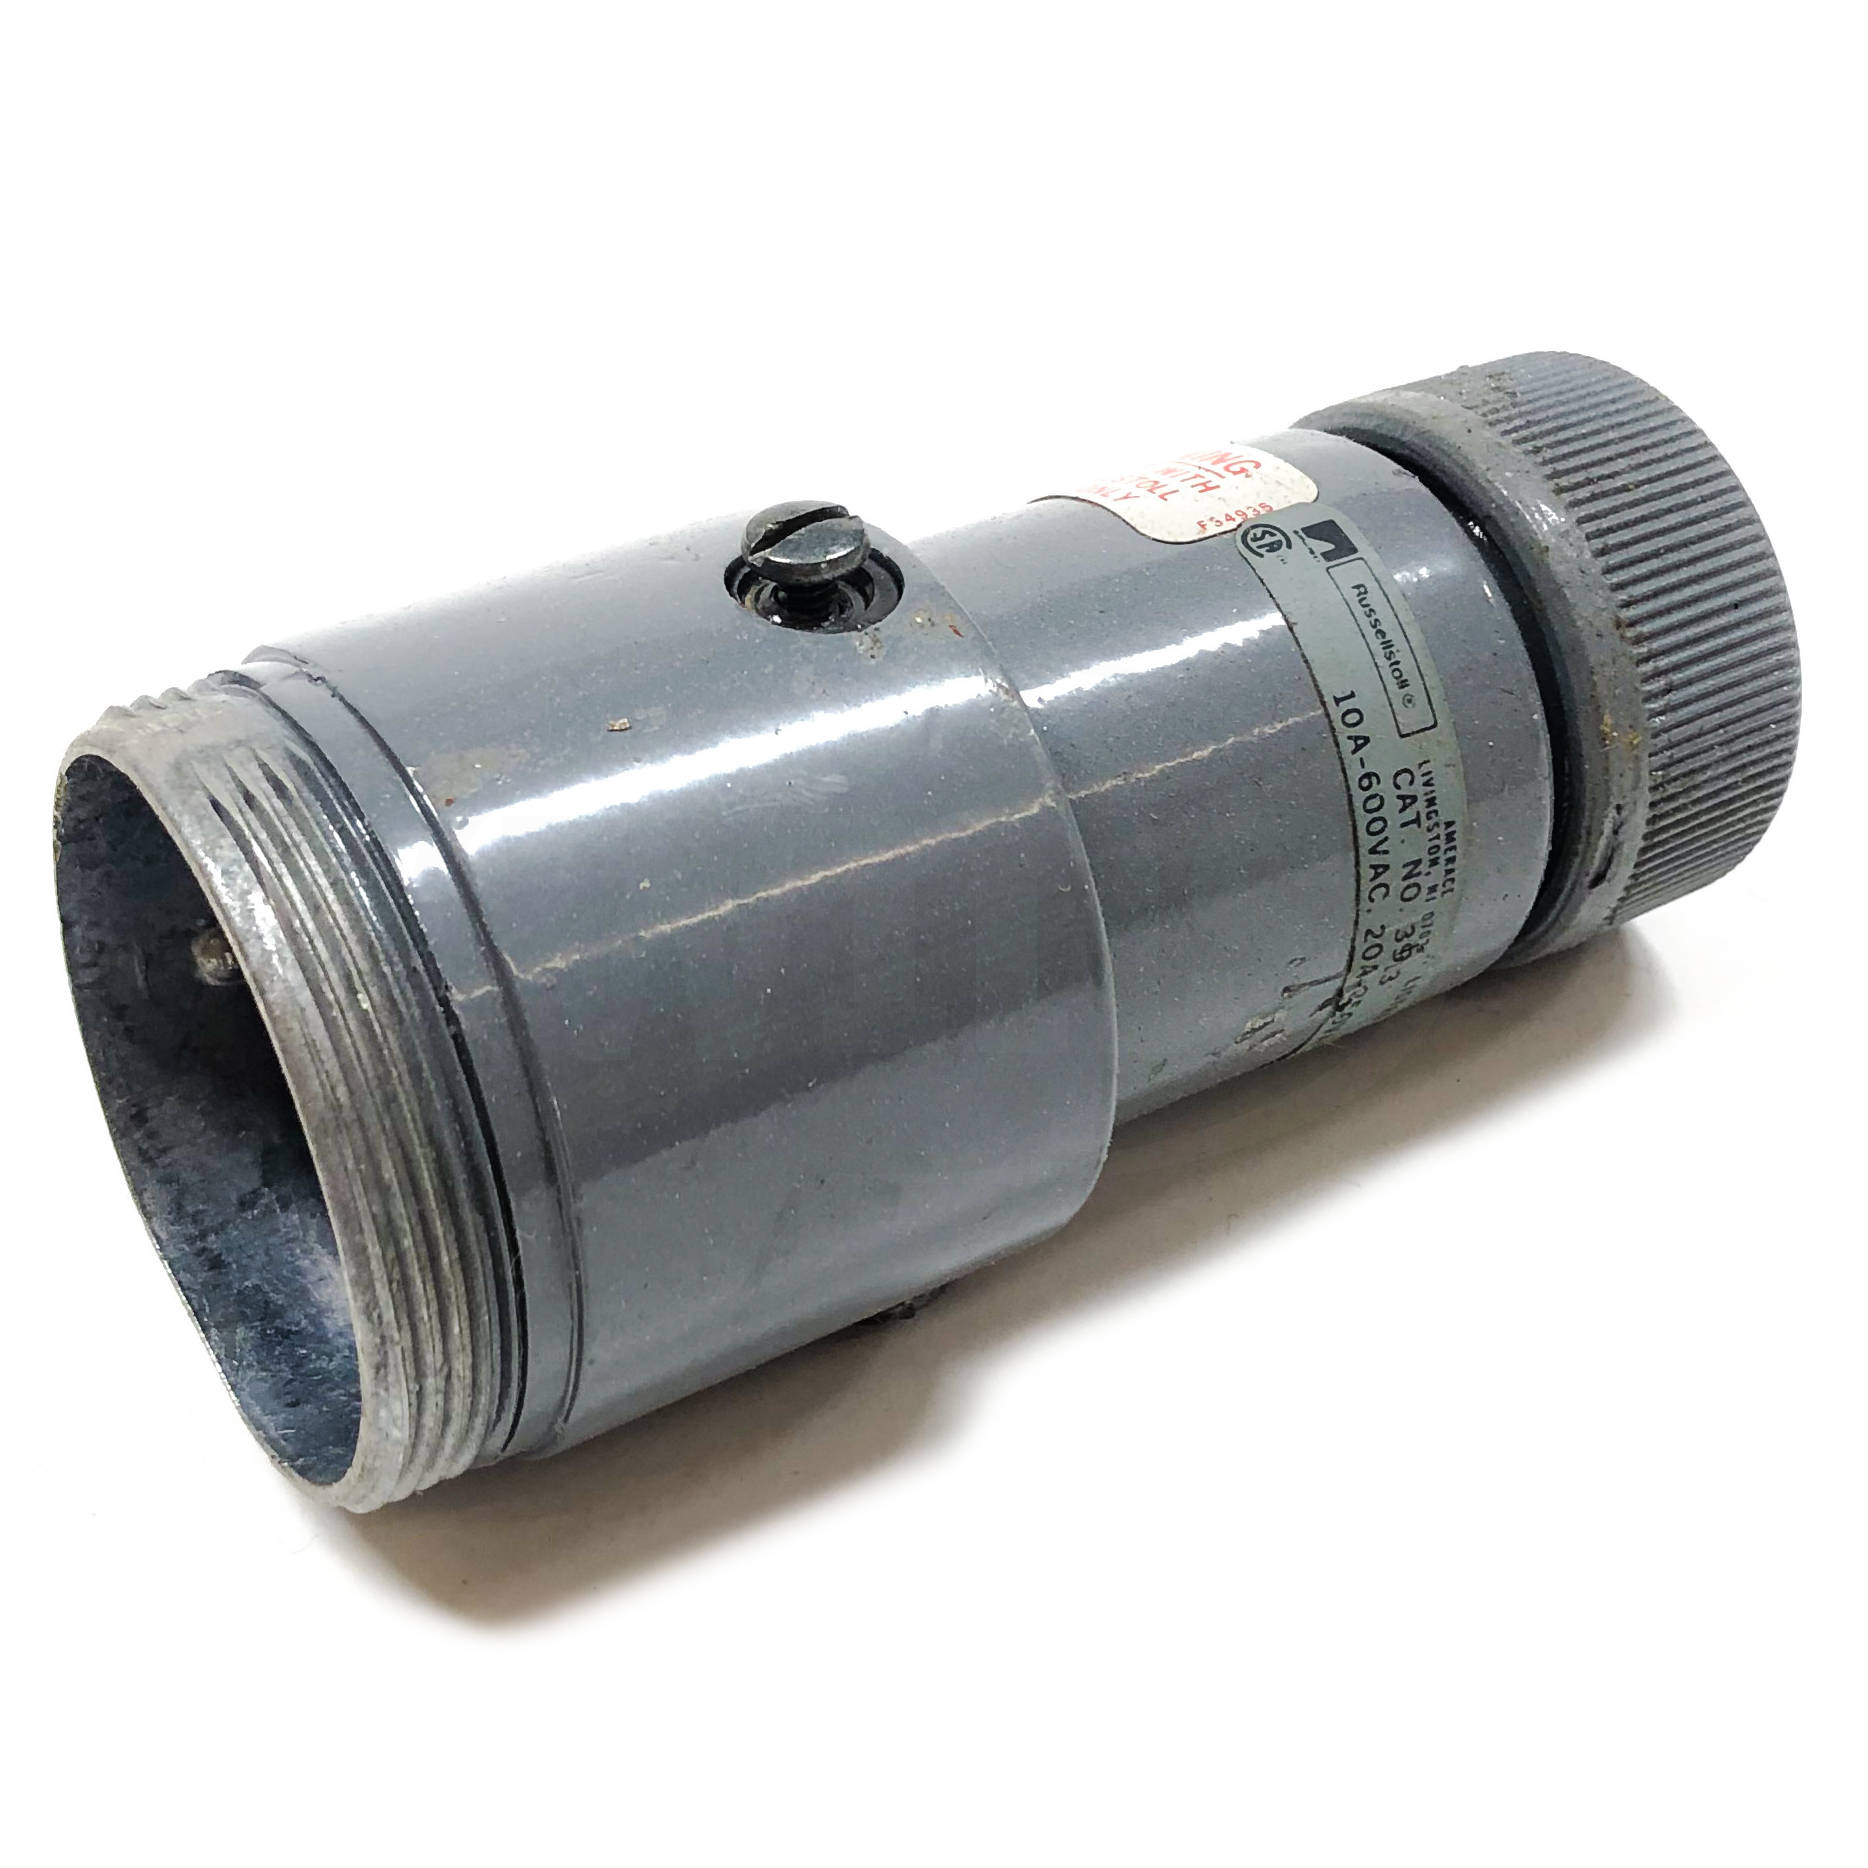 3913 Russellstoll Connector, 2-Wire, 3-Pole 3